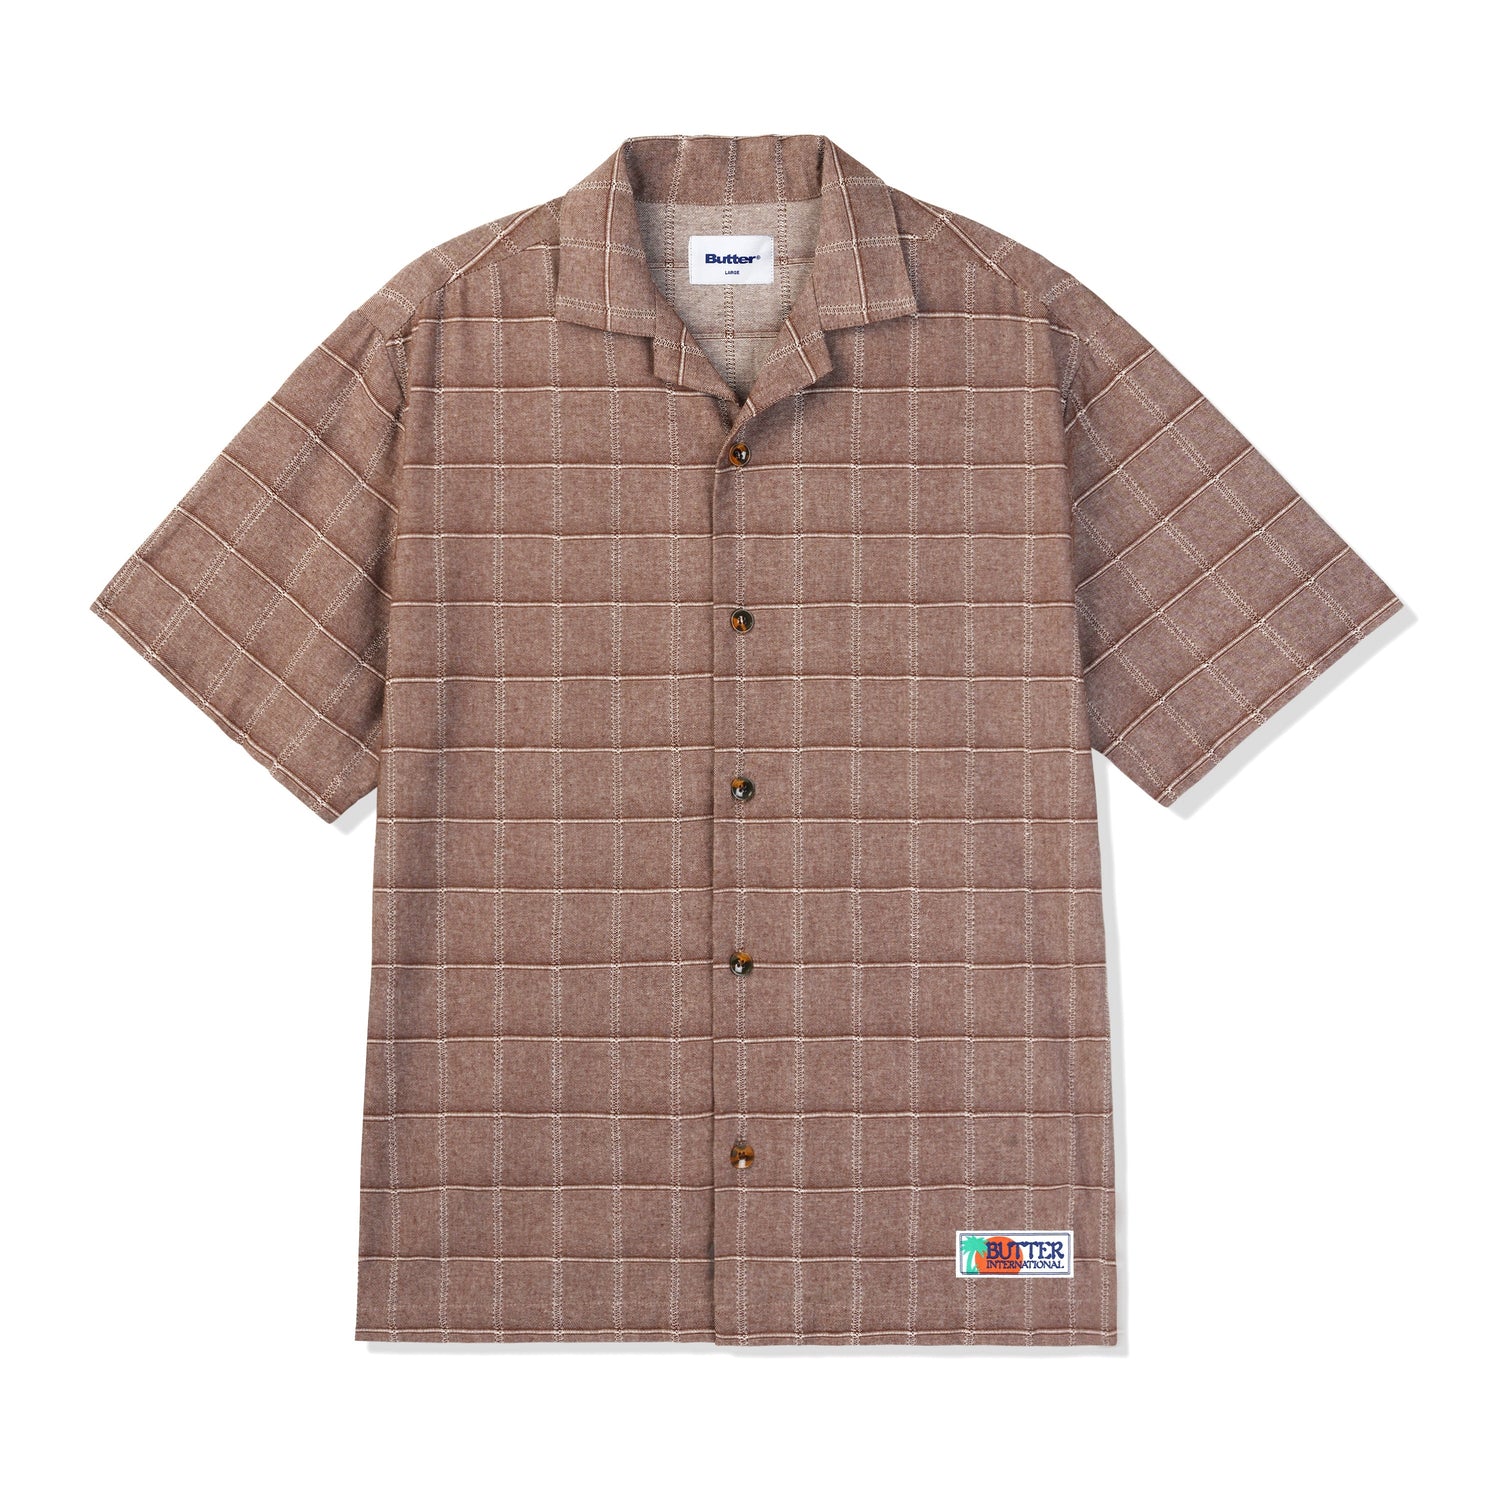 Pacific S/S Shirt, Chestnut